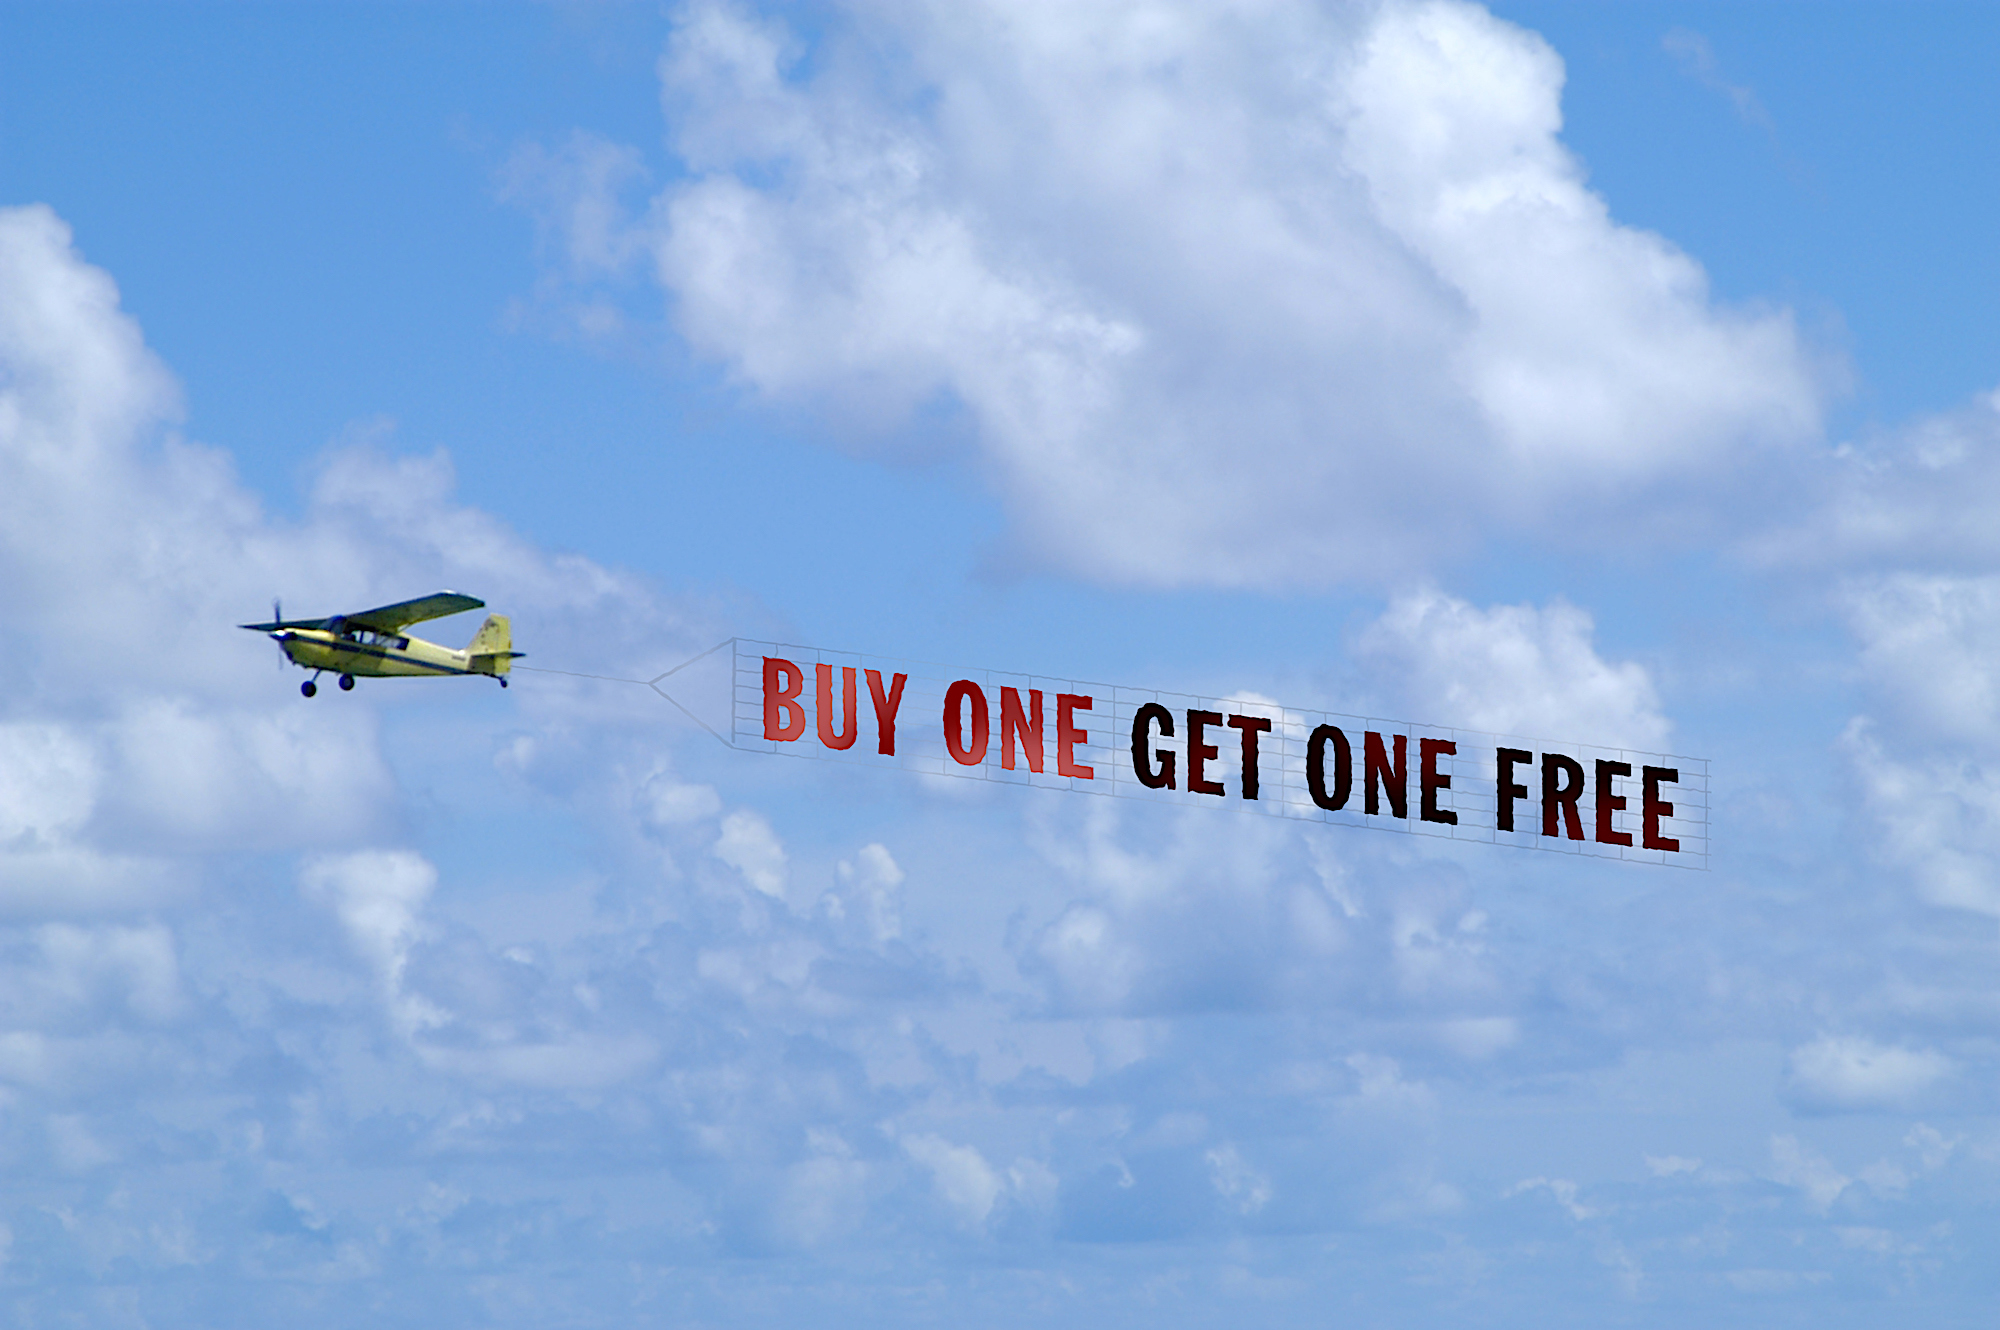 Mass advertising using aerial ads is cost effective